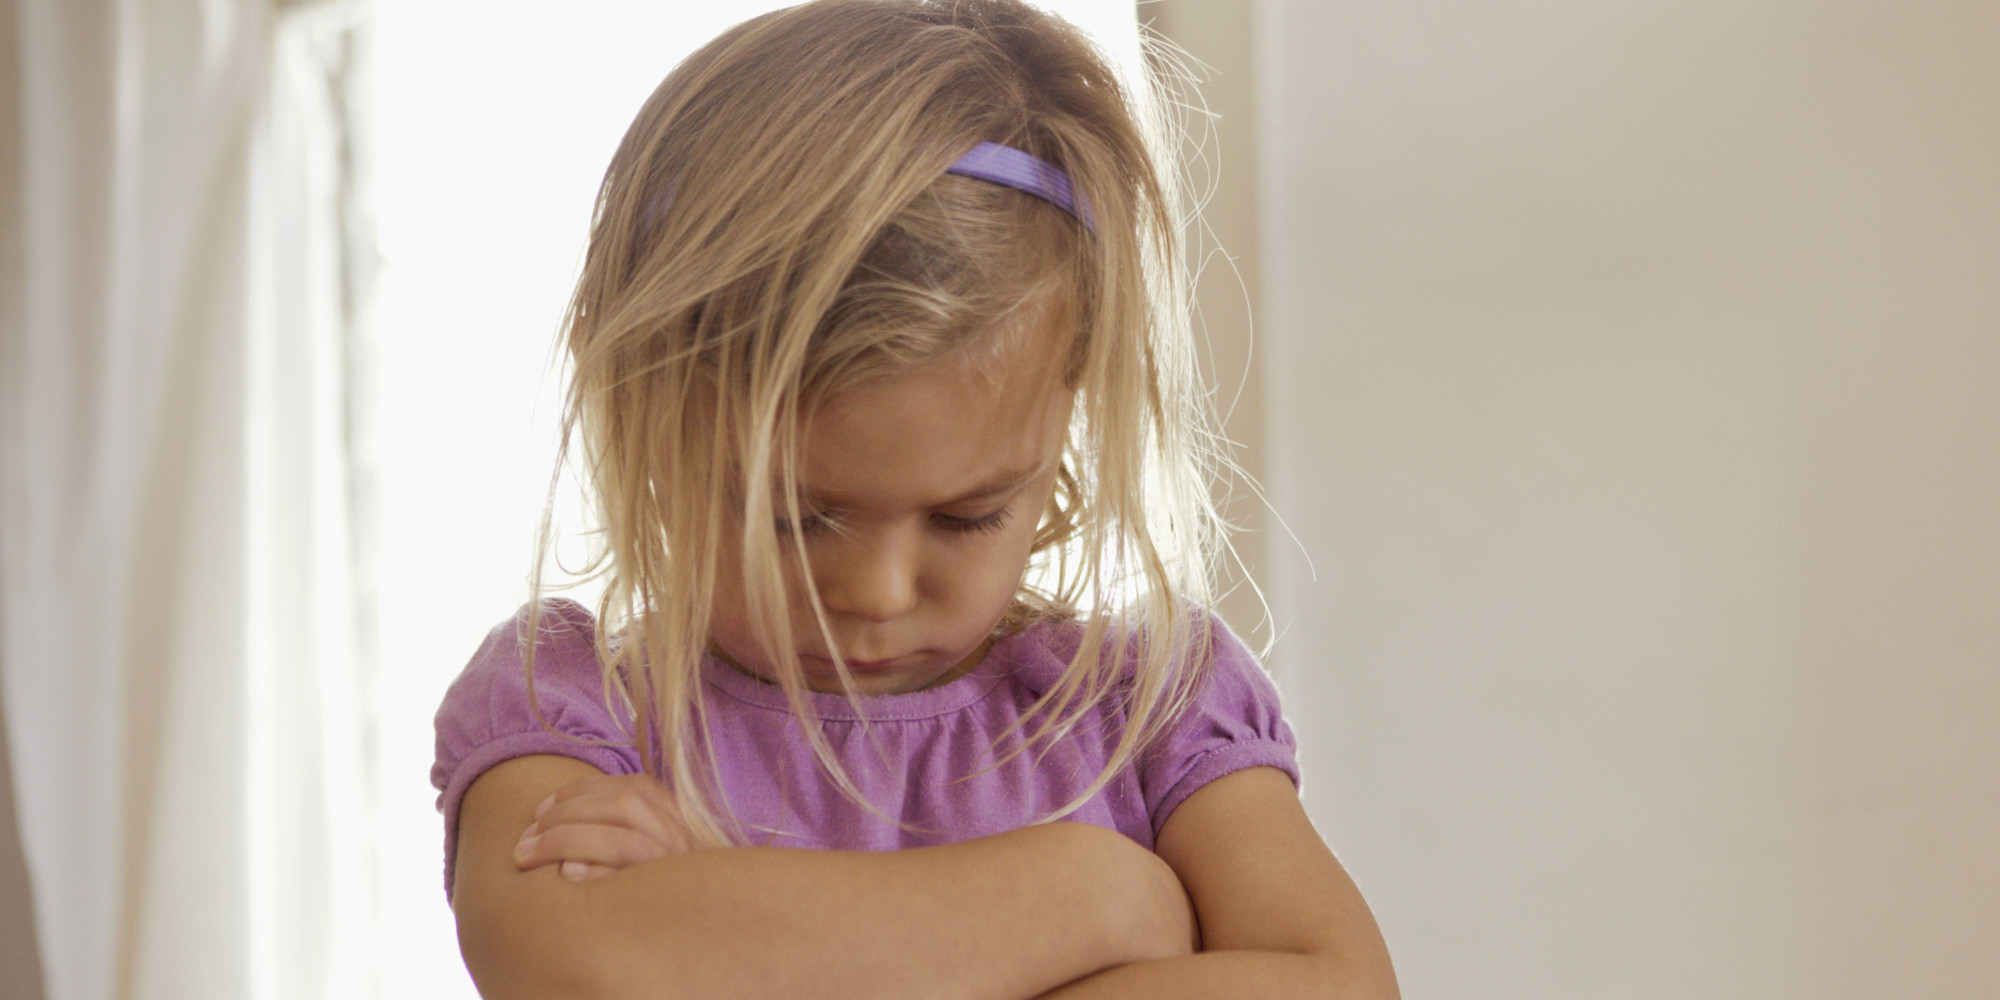 4 Awesome Ways To Deal With Stubborn Children